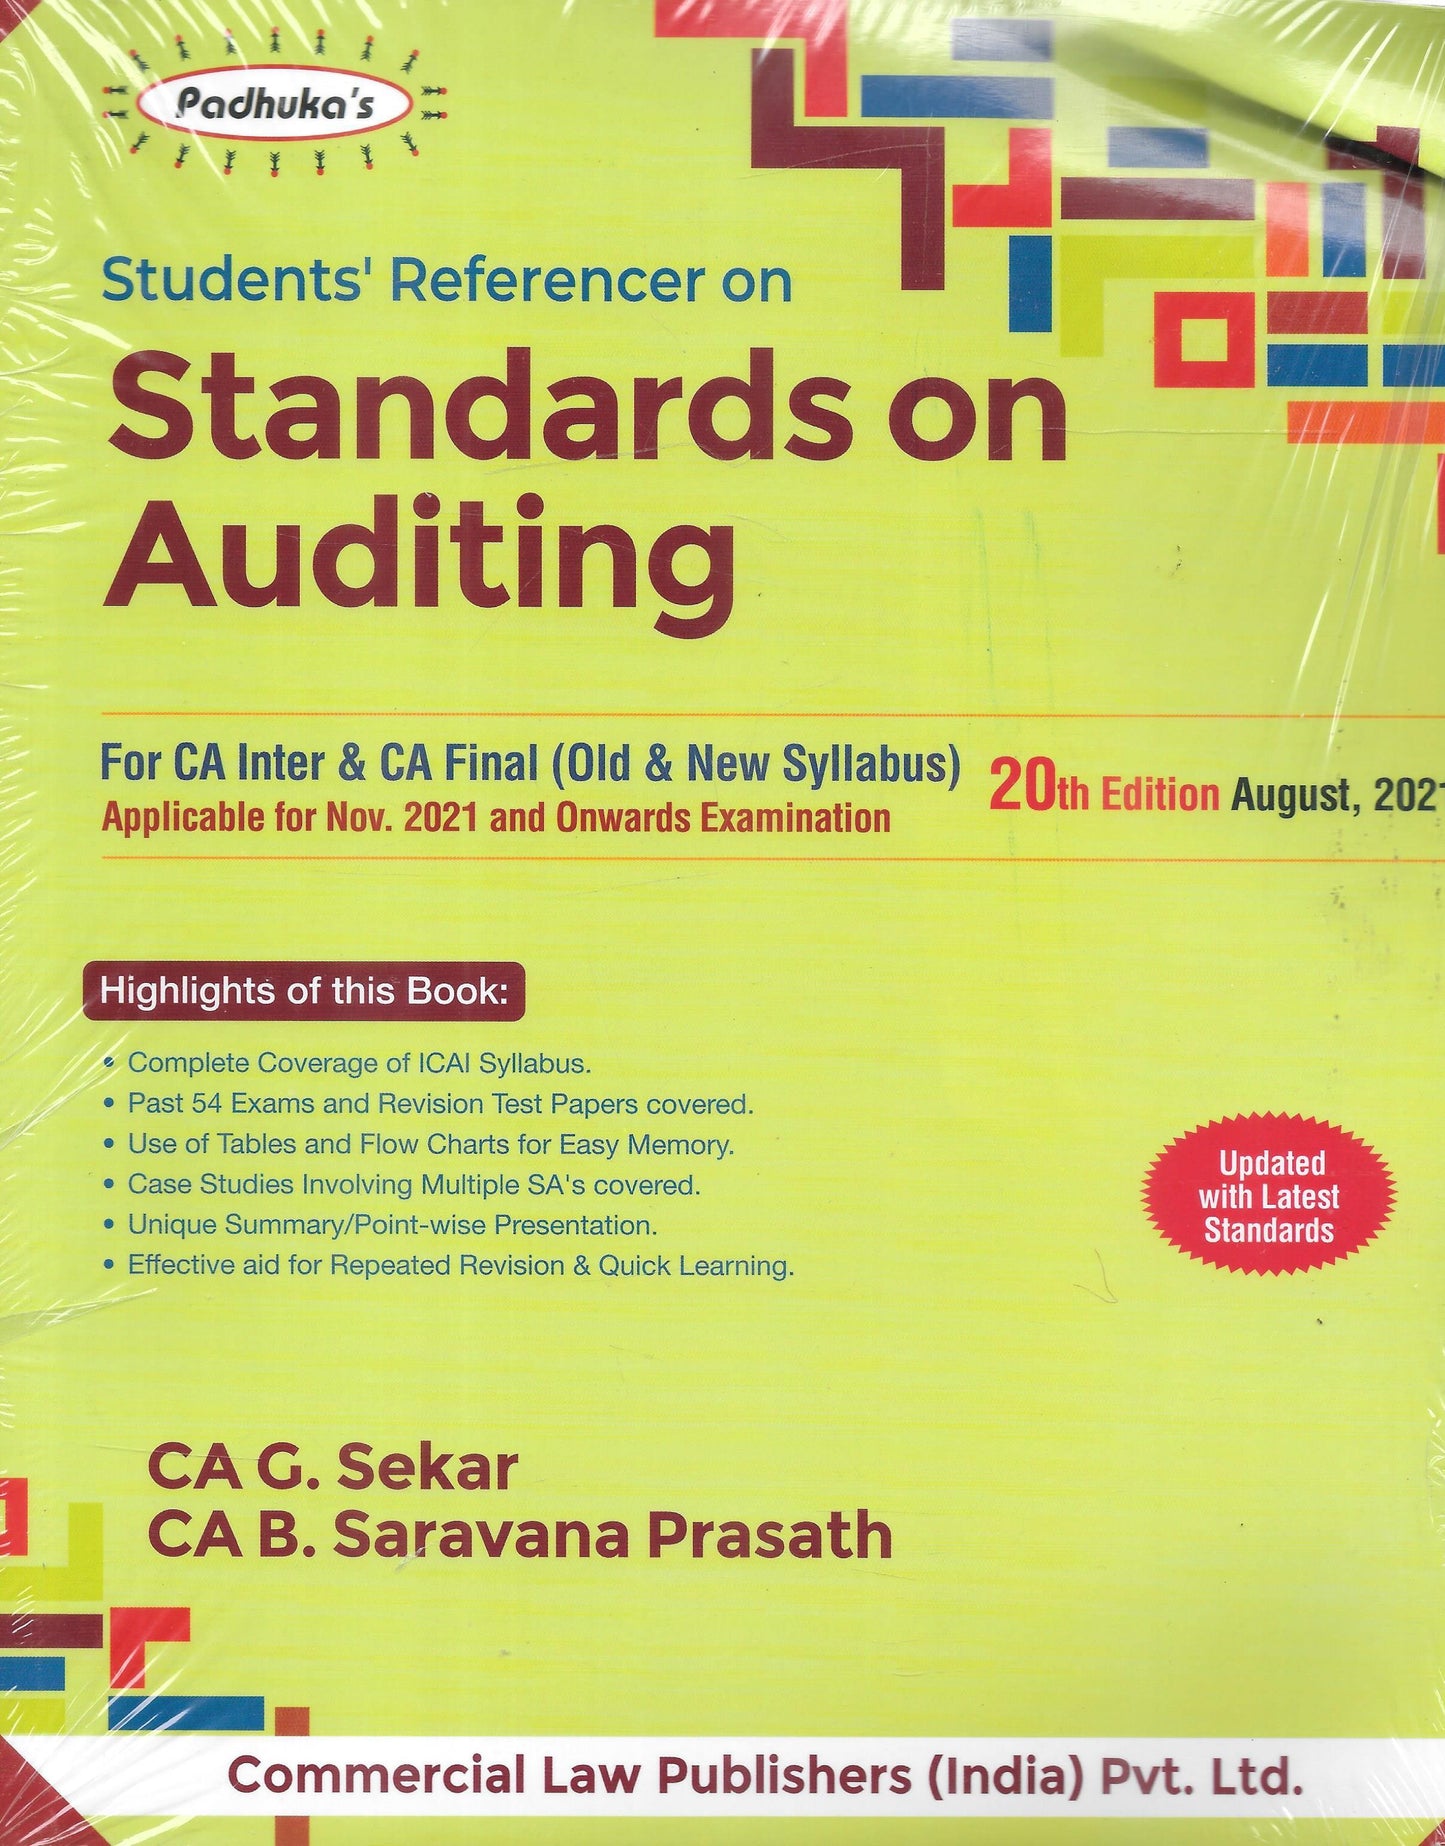 Students Referencer on Standards on Auditing - CA Inter and CA Final